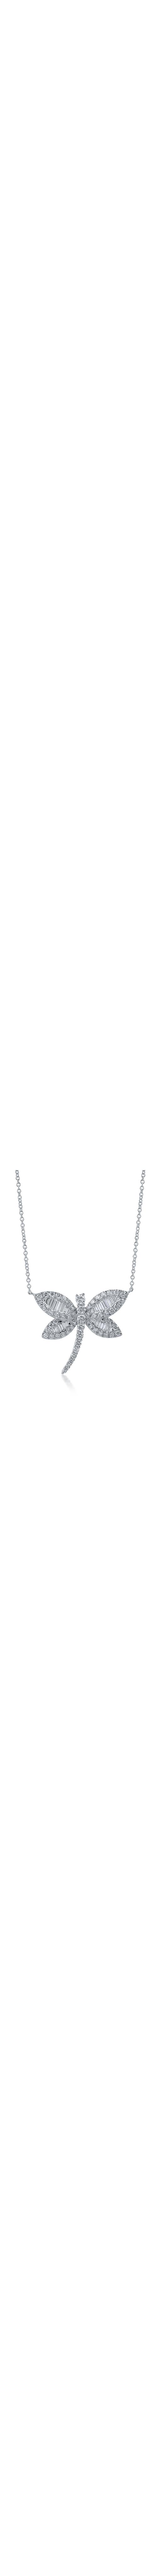 White gold chain with dragonfly pendant with 1.96ct diamonds